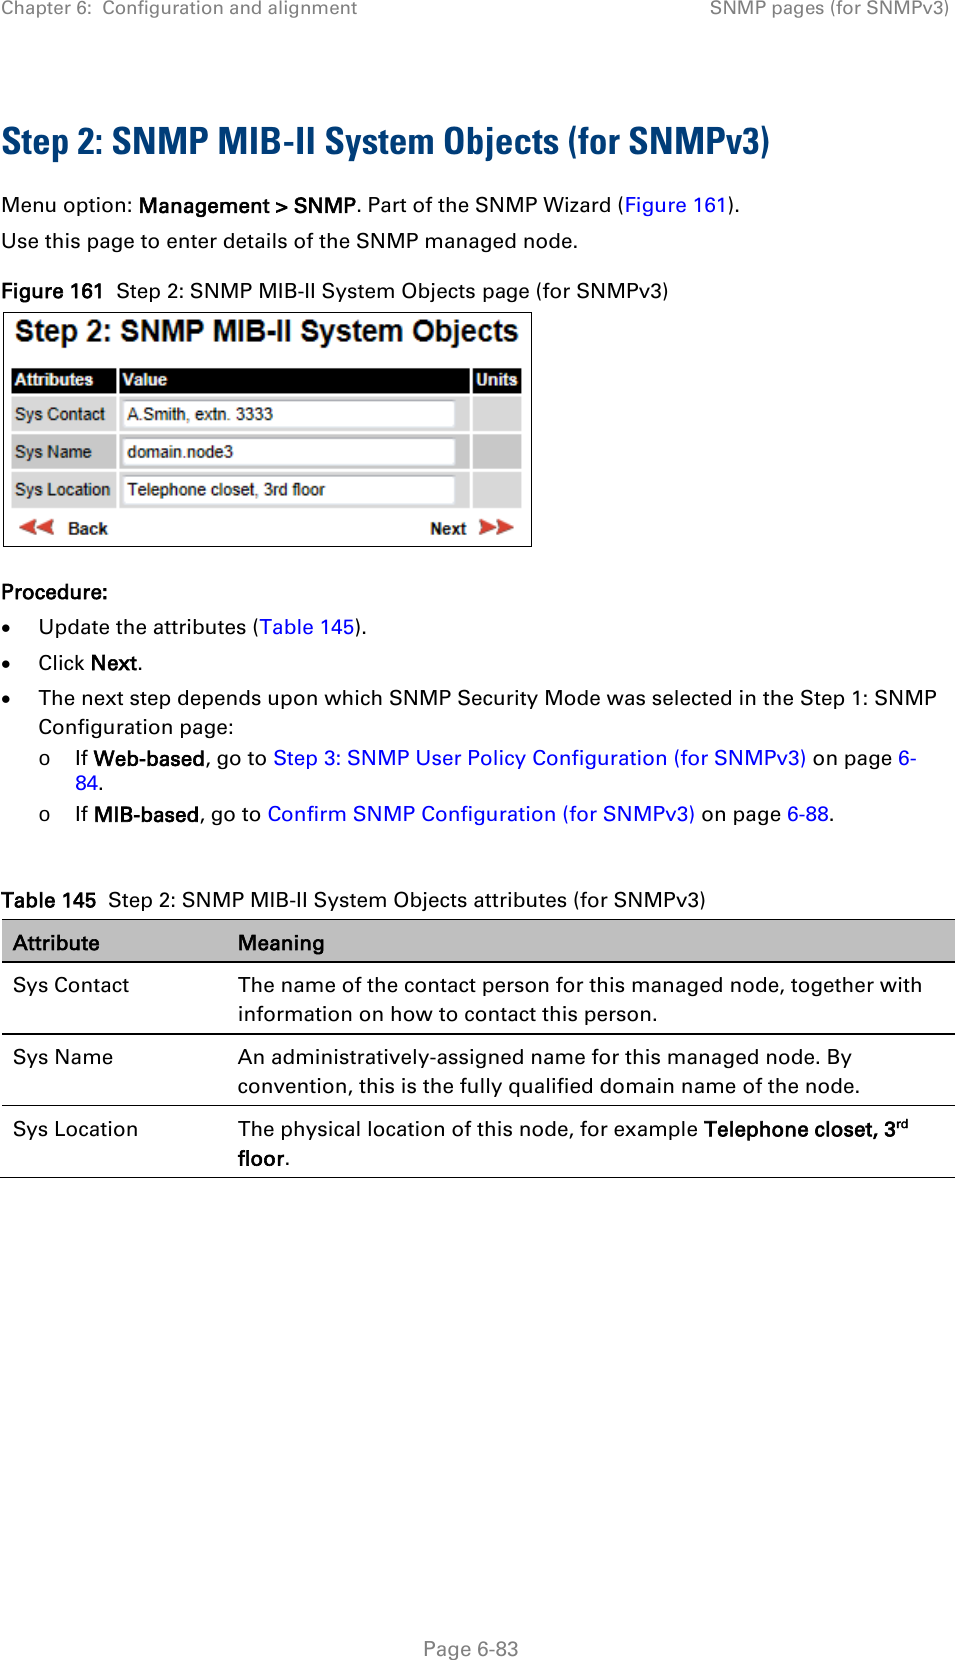 Chapter 6:  Configuration and alignment SNMP pages (for SNMPv3)  Step 2: SNMP MIB-II System Objects (for SNMPv3) Menu option: Management &gt; SNMP. Part of the SNMP Wizard (Figure 161). Use this page to enter details of the SNMP managed node. Figure 161  Step 2: SNMP MIB-II System Objects page (for SNMPv3)  Procedure: • Update the attributes (Table 145). • Click Next. • The next step depends upon which SNMP Security Mode was selected in the Step 1: SNMP Configuration page: o If Web-based, go to Step 3: SNMP User Policy Configuration (for SNMPv3) on page 6-84. o If MIB-based, go to Confirm SNMP Configuration (for SNMPv3) on page 6-88.  Table 145  Step 2: SNMP MIB-II System Objects attributes (for SNMPv3) Attribute Meaning Sys Contact The name of the contact person for this managed node, together with information on how to contact this person. Sys Name An administratively-assigned name for this managed node. By convention, this is the fully qualified domain name of the node. Sys Location The physical location of this node, for example Telephone closet, 3rd floor.    Page 6-83 